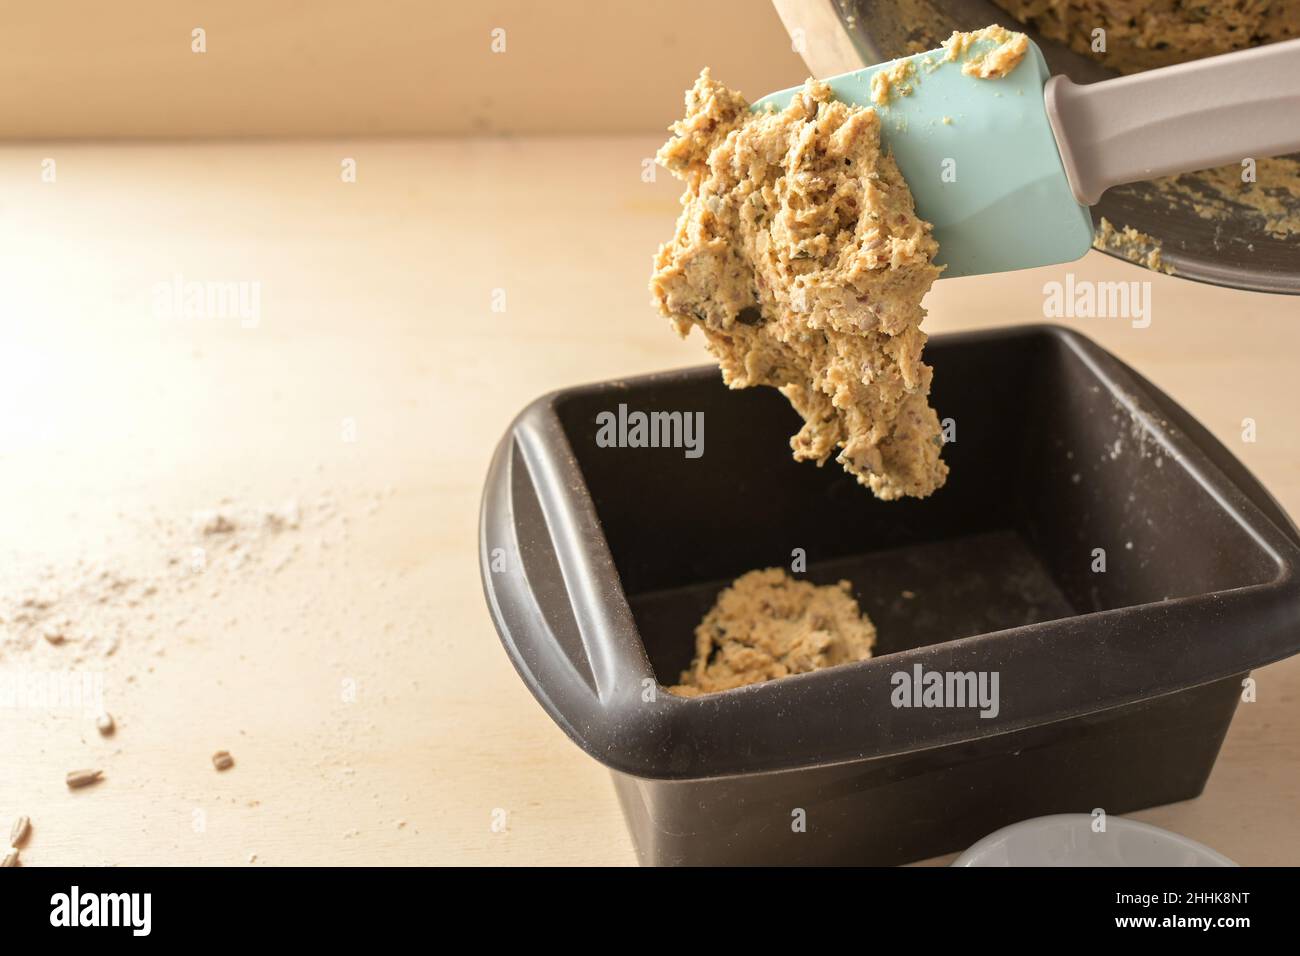 https://c8.alamy.com/comp/2HHK8NT/homemade-bread-dough-from-whole-grain-flour-with-seeds-is-poured-from-the-mixing-bowl-into-a-silicone-baking-mold-healthy-recipe-copy-space-selecte-2HHK8NT.jpg